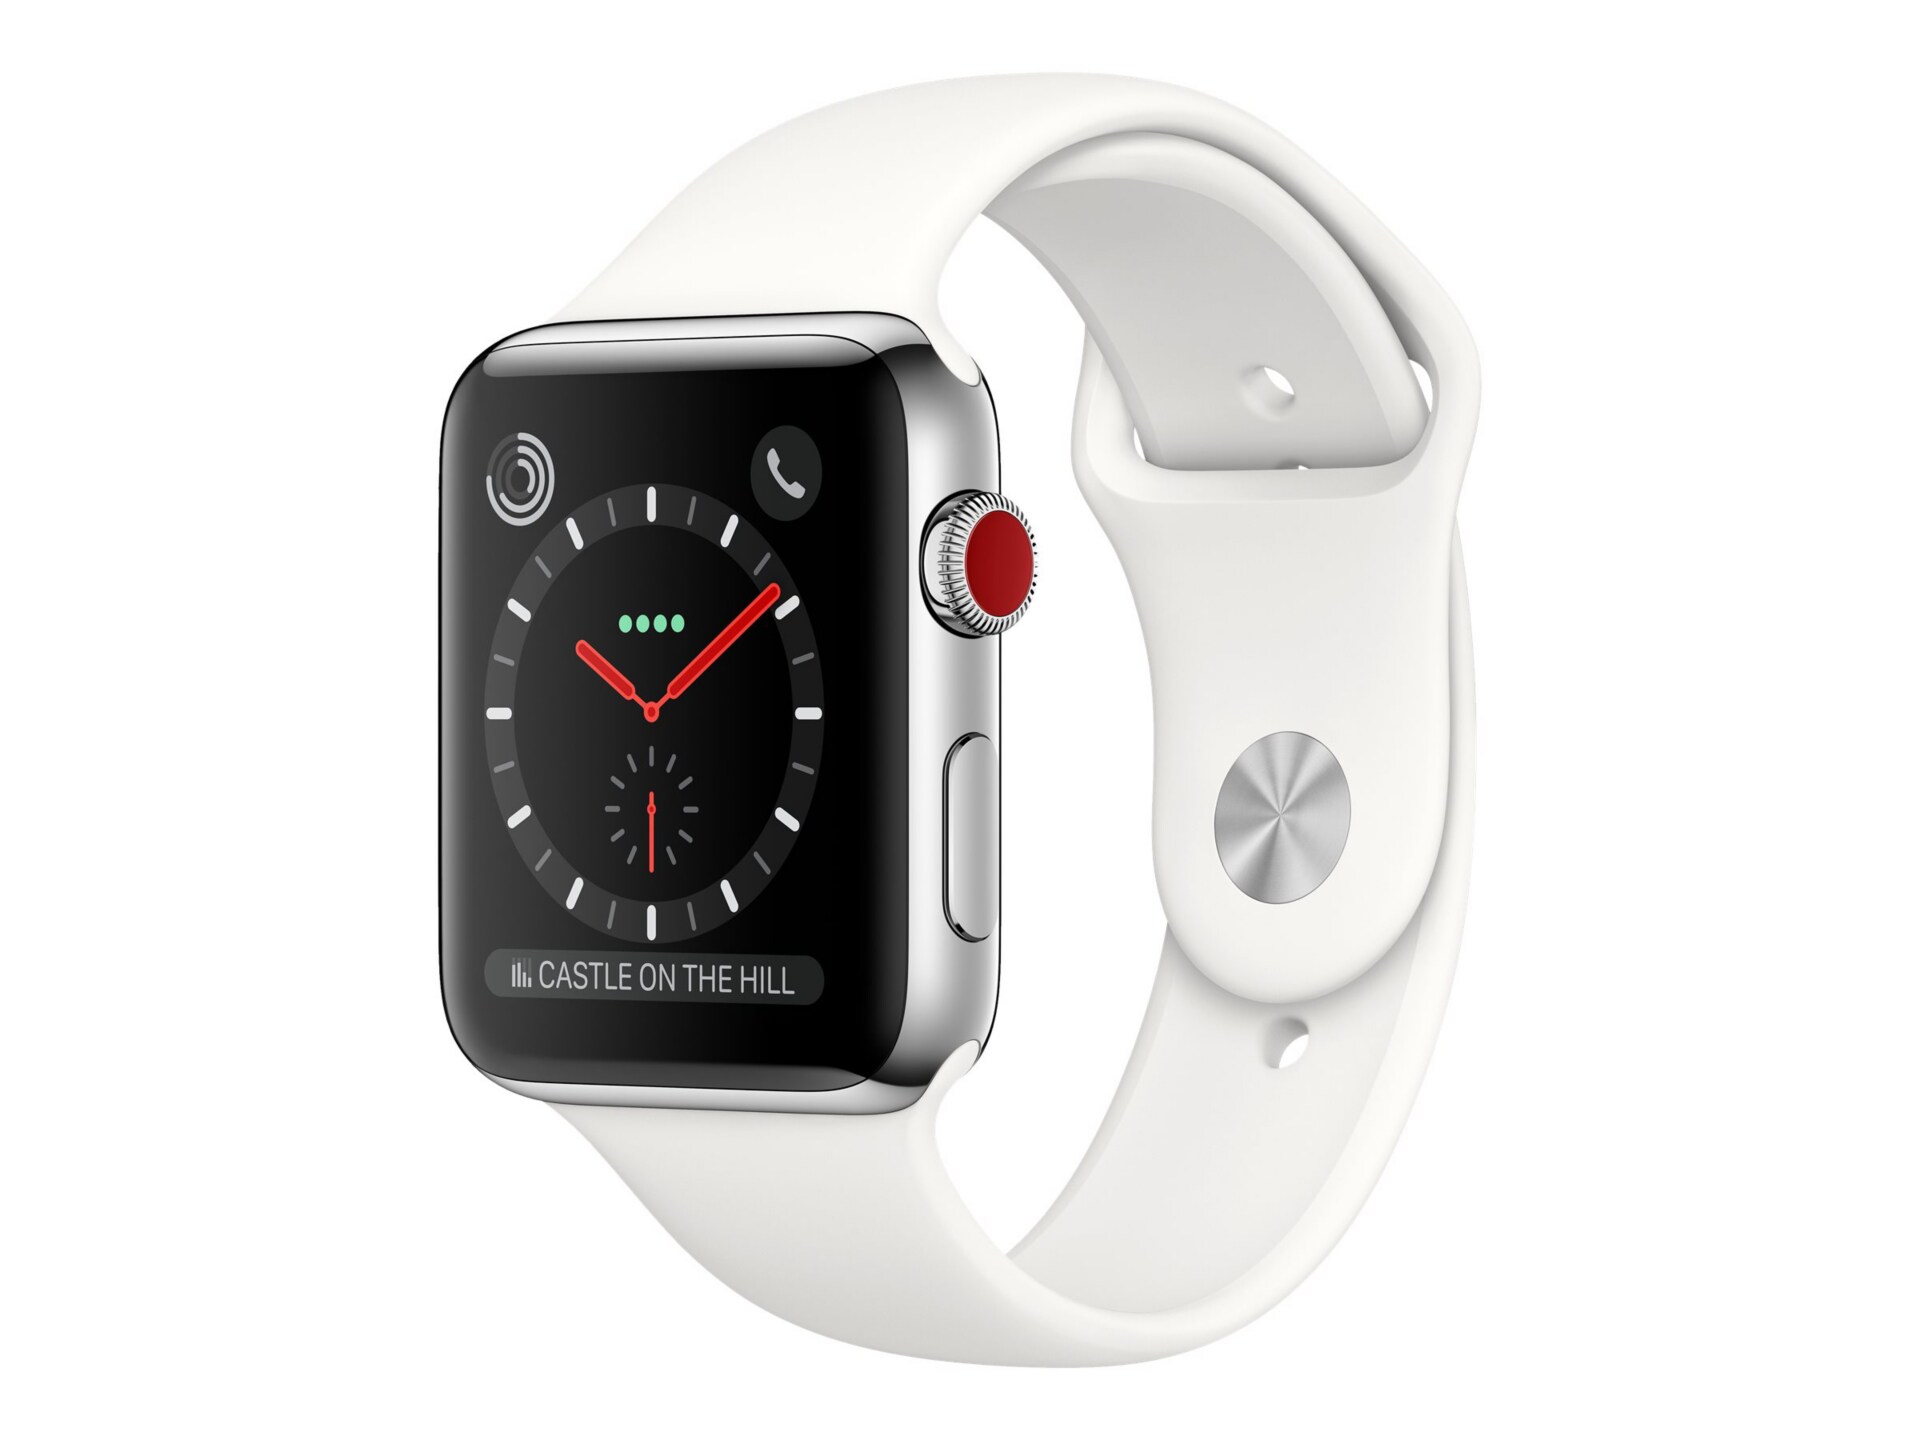 Apple Watch Series 3 (GPS + Cellular) - stainless steel - smart watch with